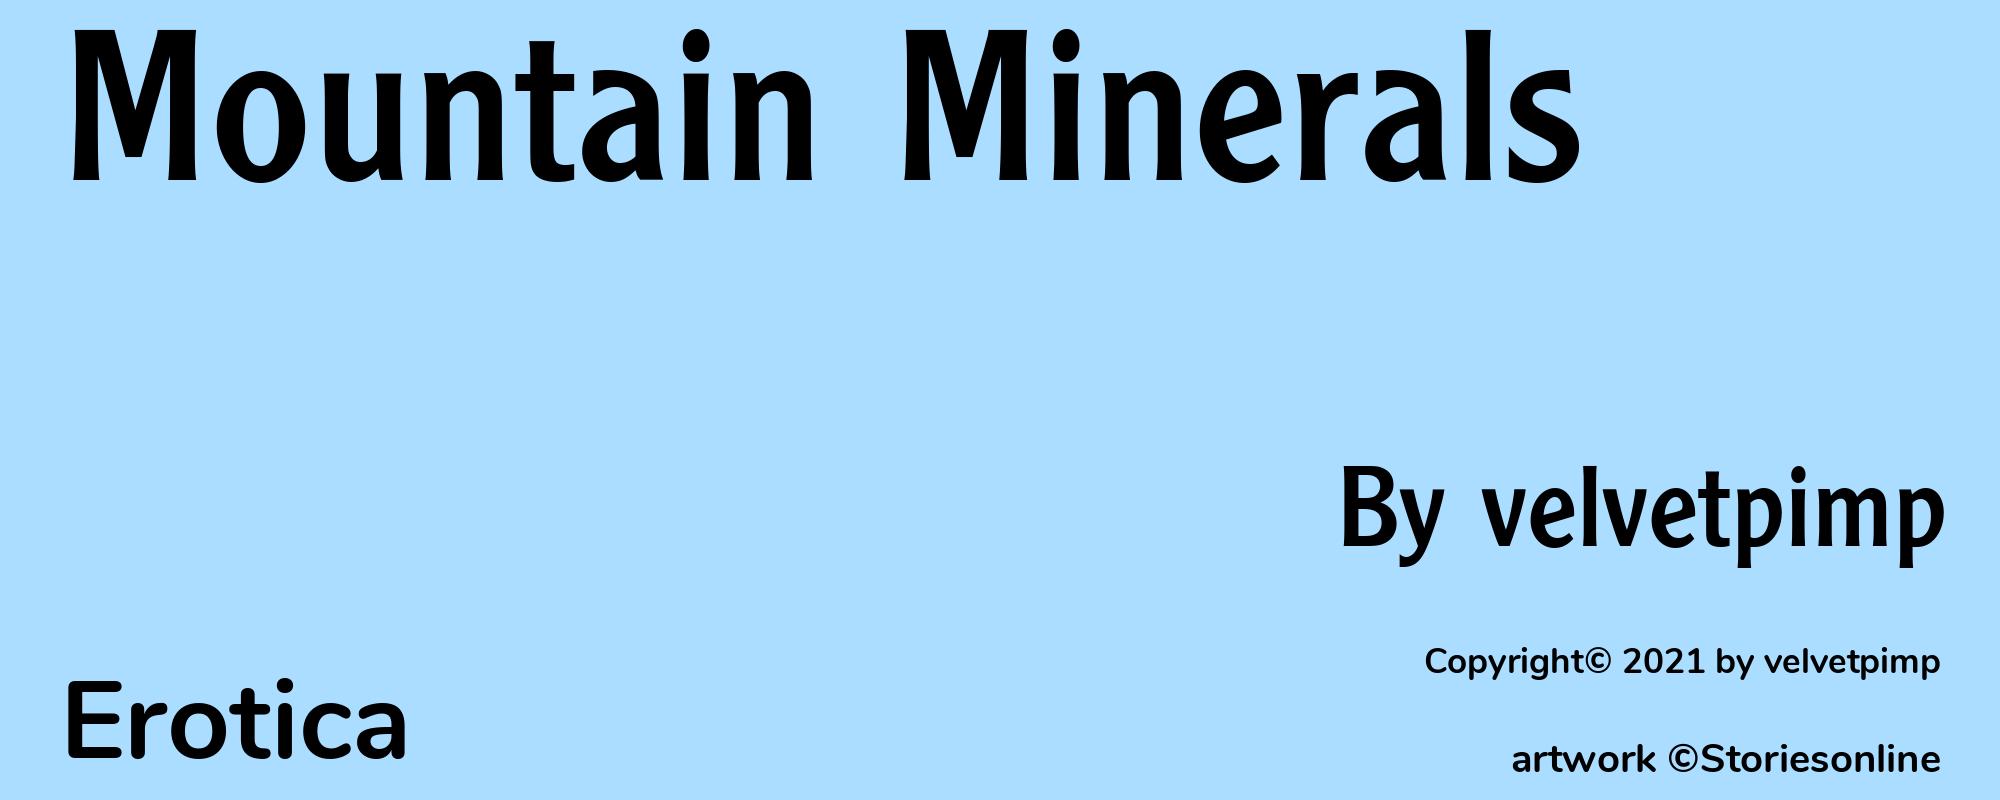 Mountain Minerals - Cover